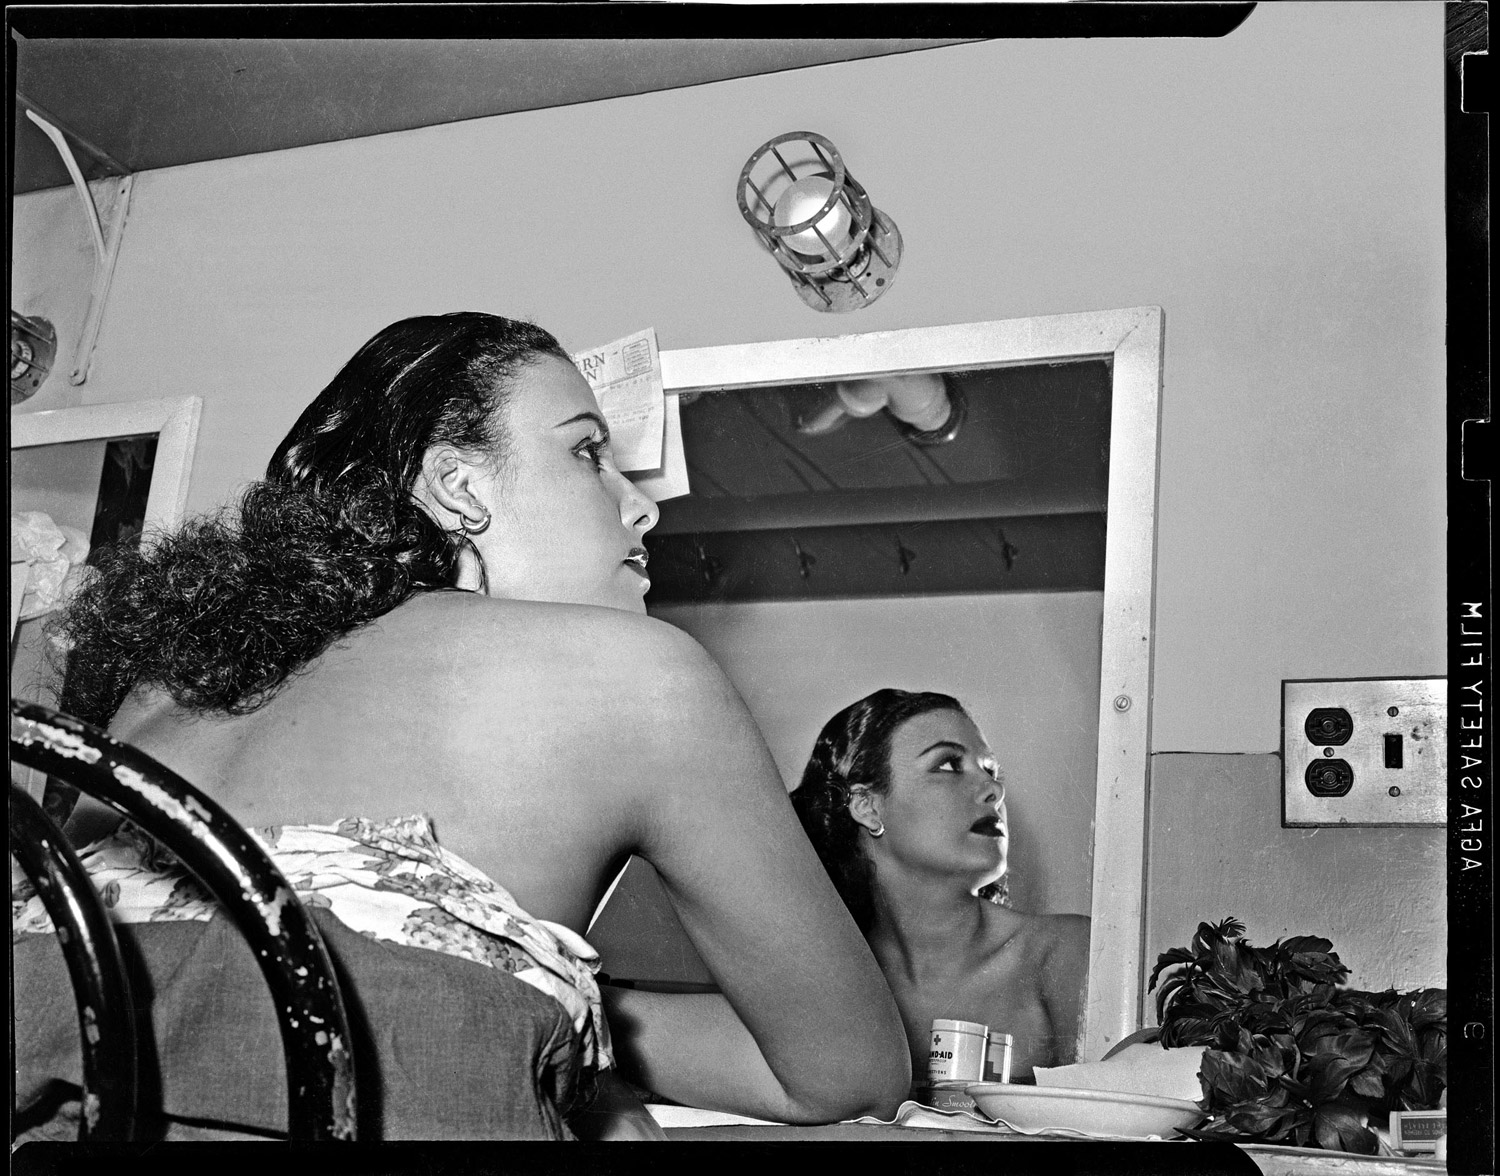 Lena Horne reflected in a mirror in her dressing room at the Stanley Theatre, 1944.